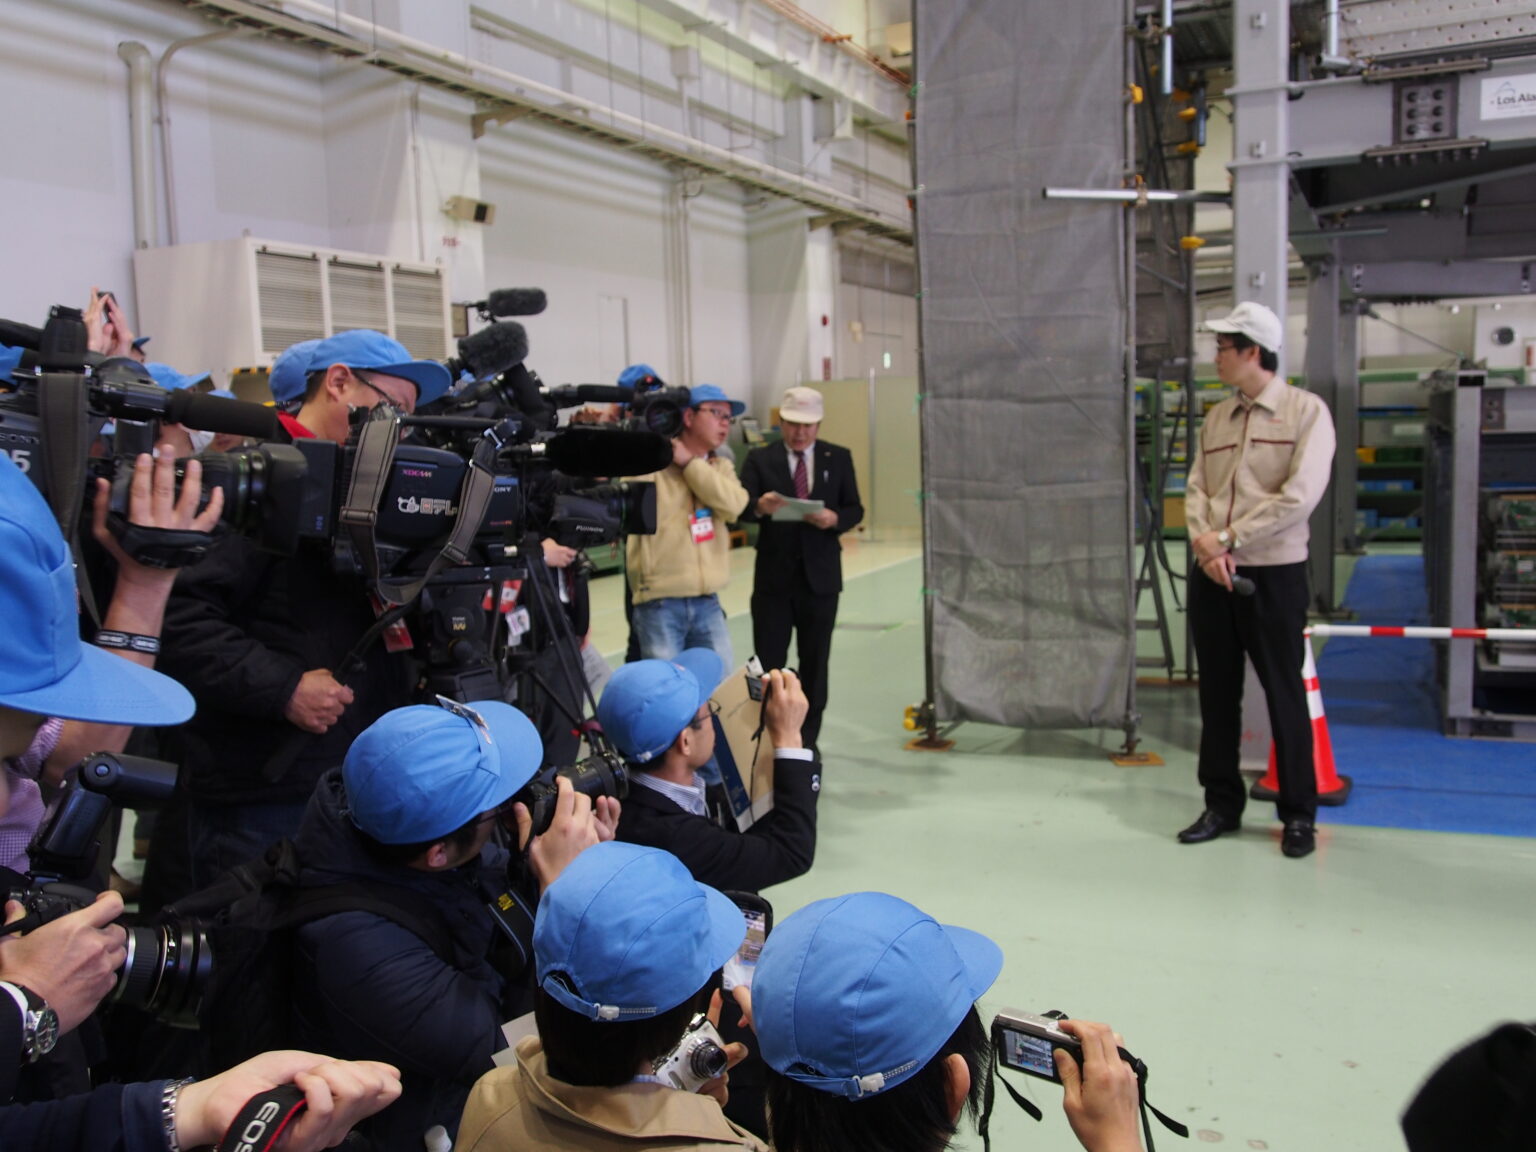 Many journalists and TV crews wanted to see the muon detectors, jointly developed by Japanese and American researchers and engineers in March 2015. © Sonja Blaschke